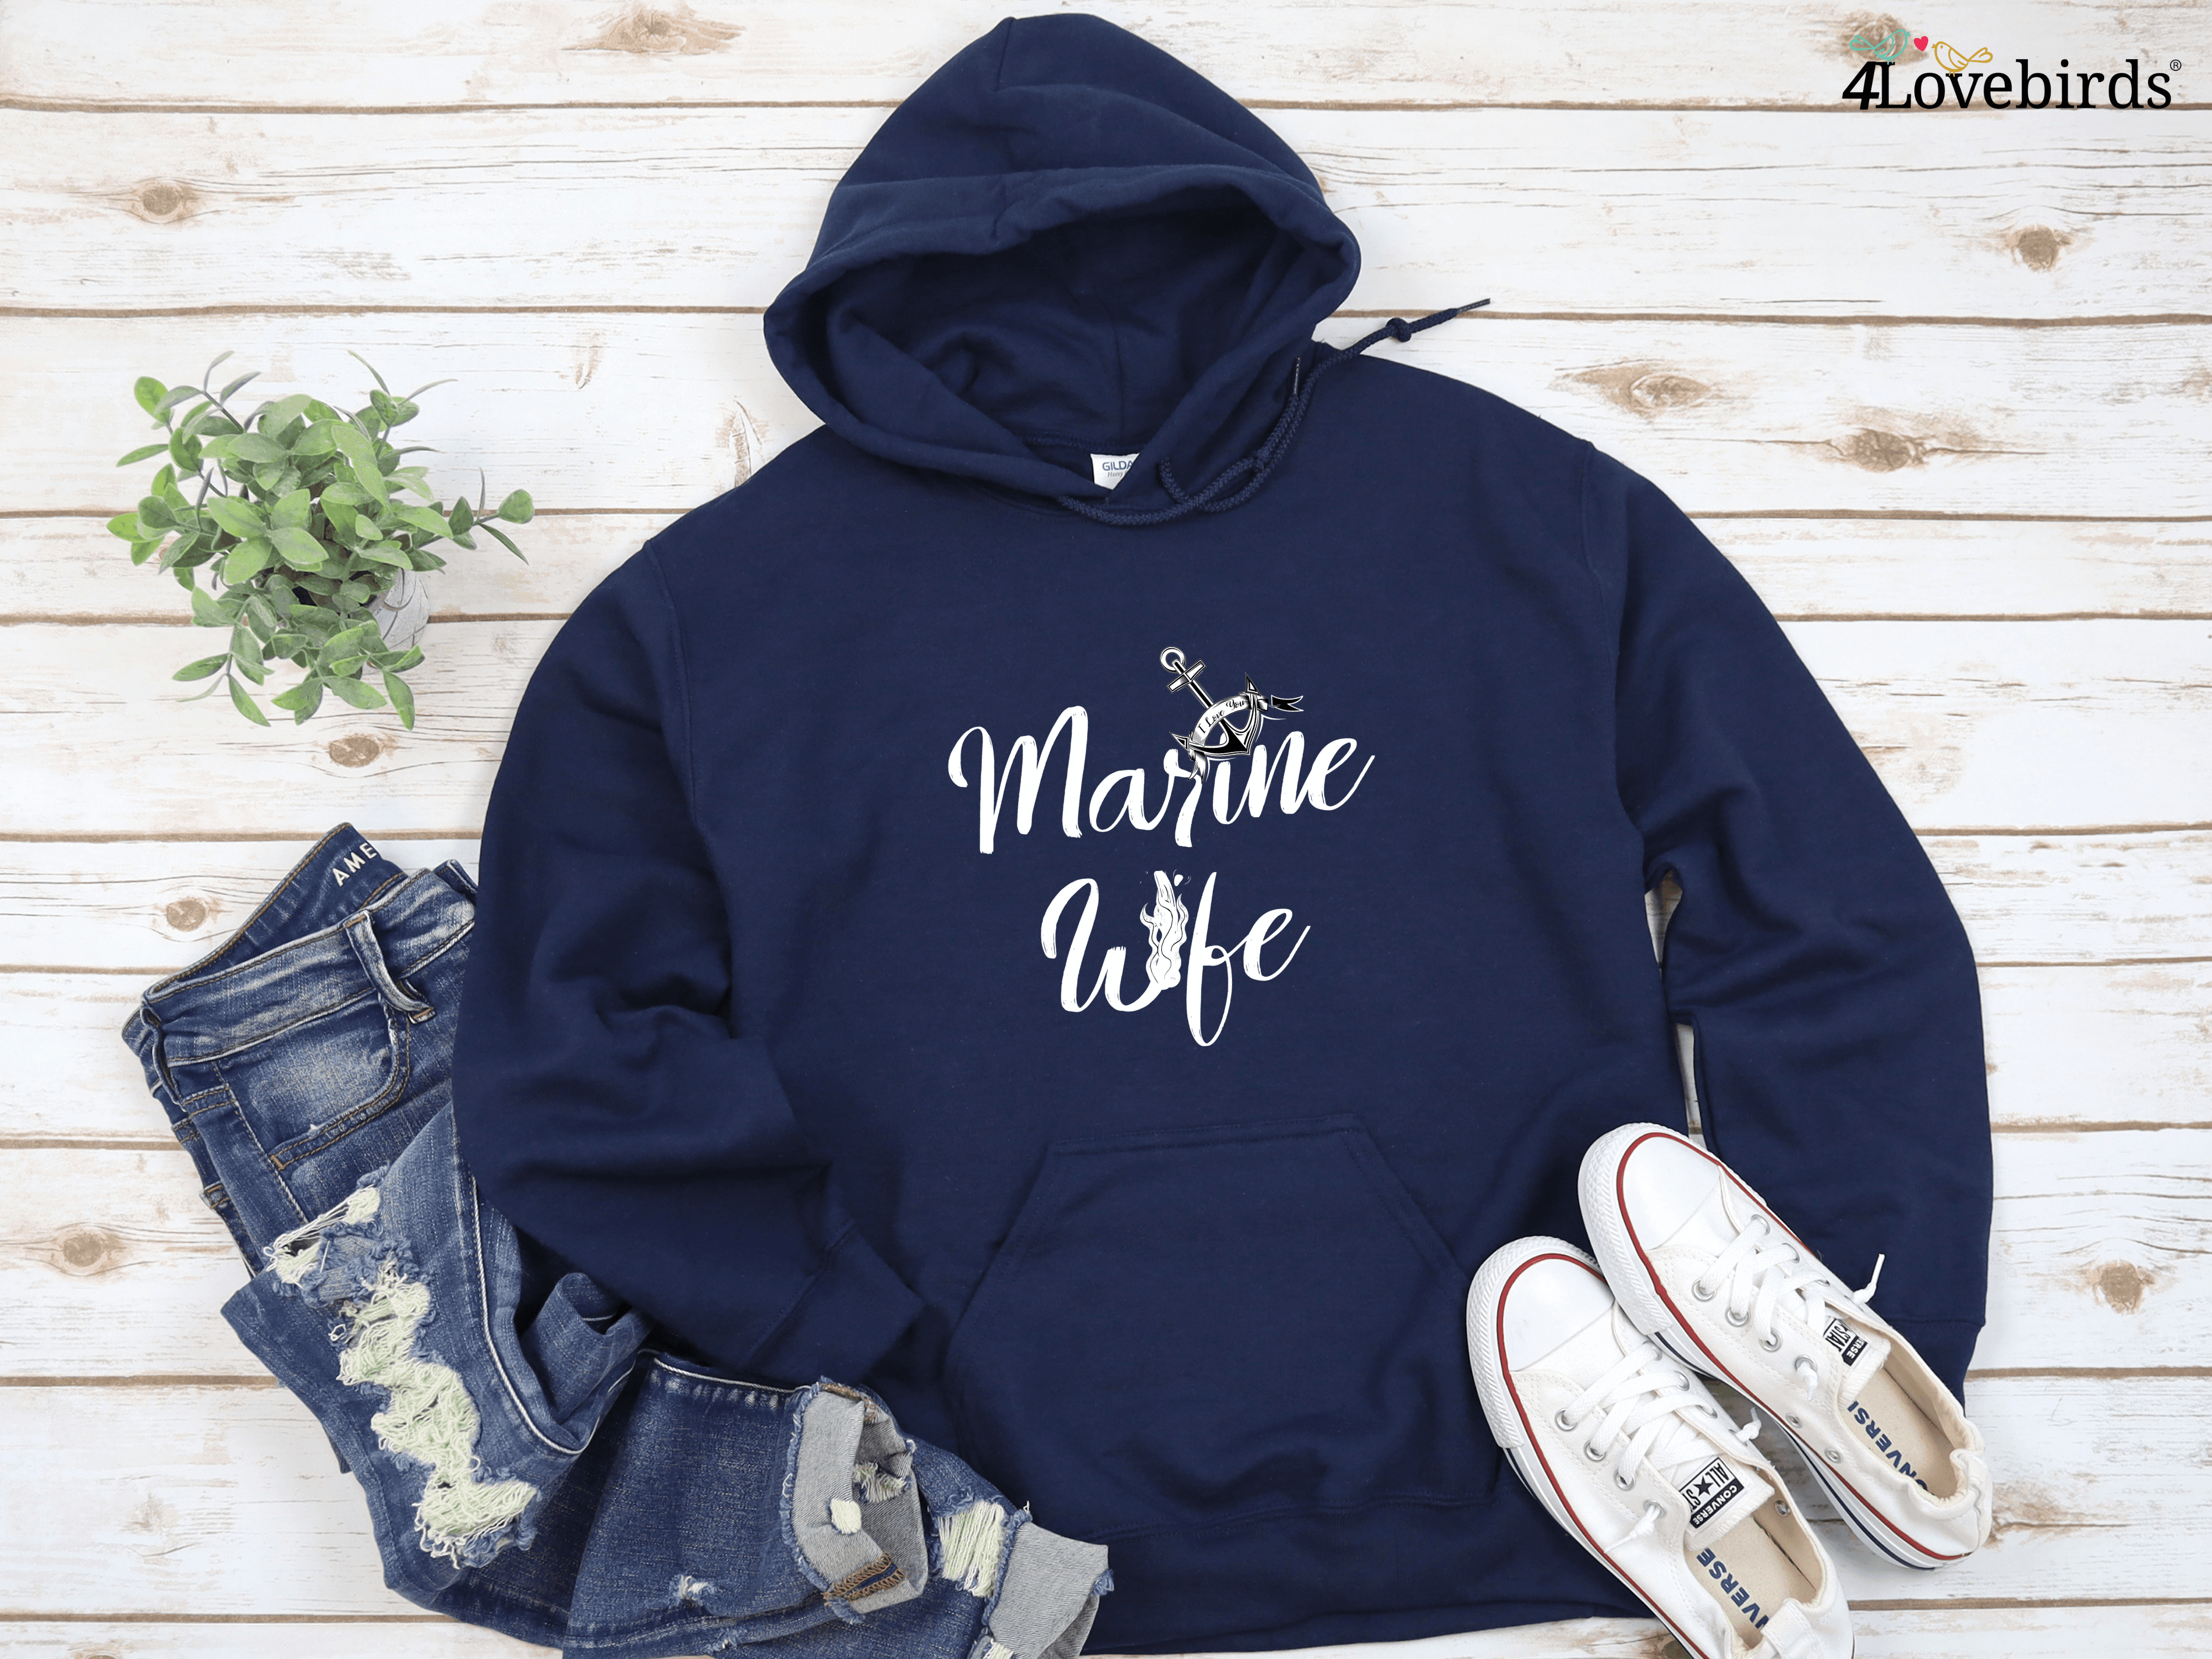 marine wife t shirt military hoodies law enforcement sweatshirts military gifts for wives for her 4lovebirds 4 0b4a61cd ef7d 4ad0 82b0 c59776508802